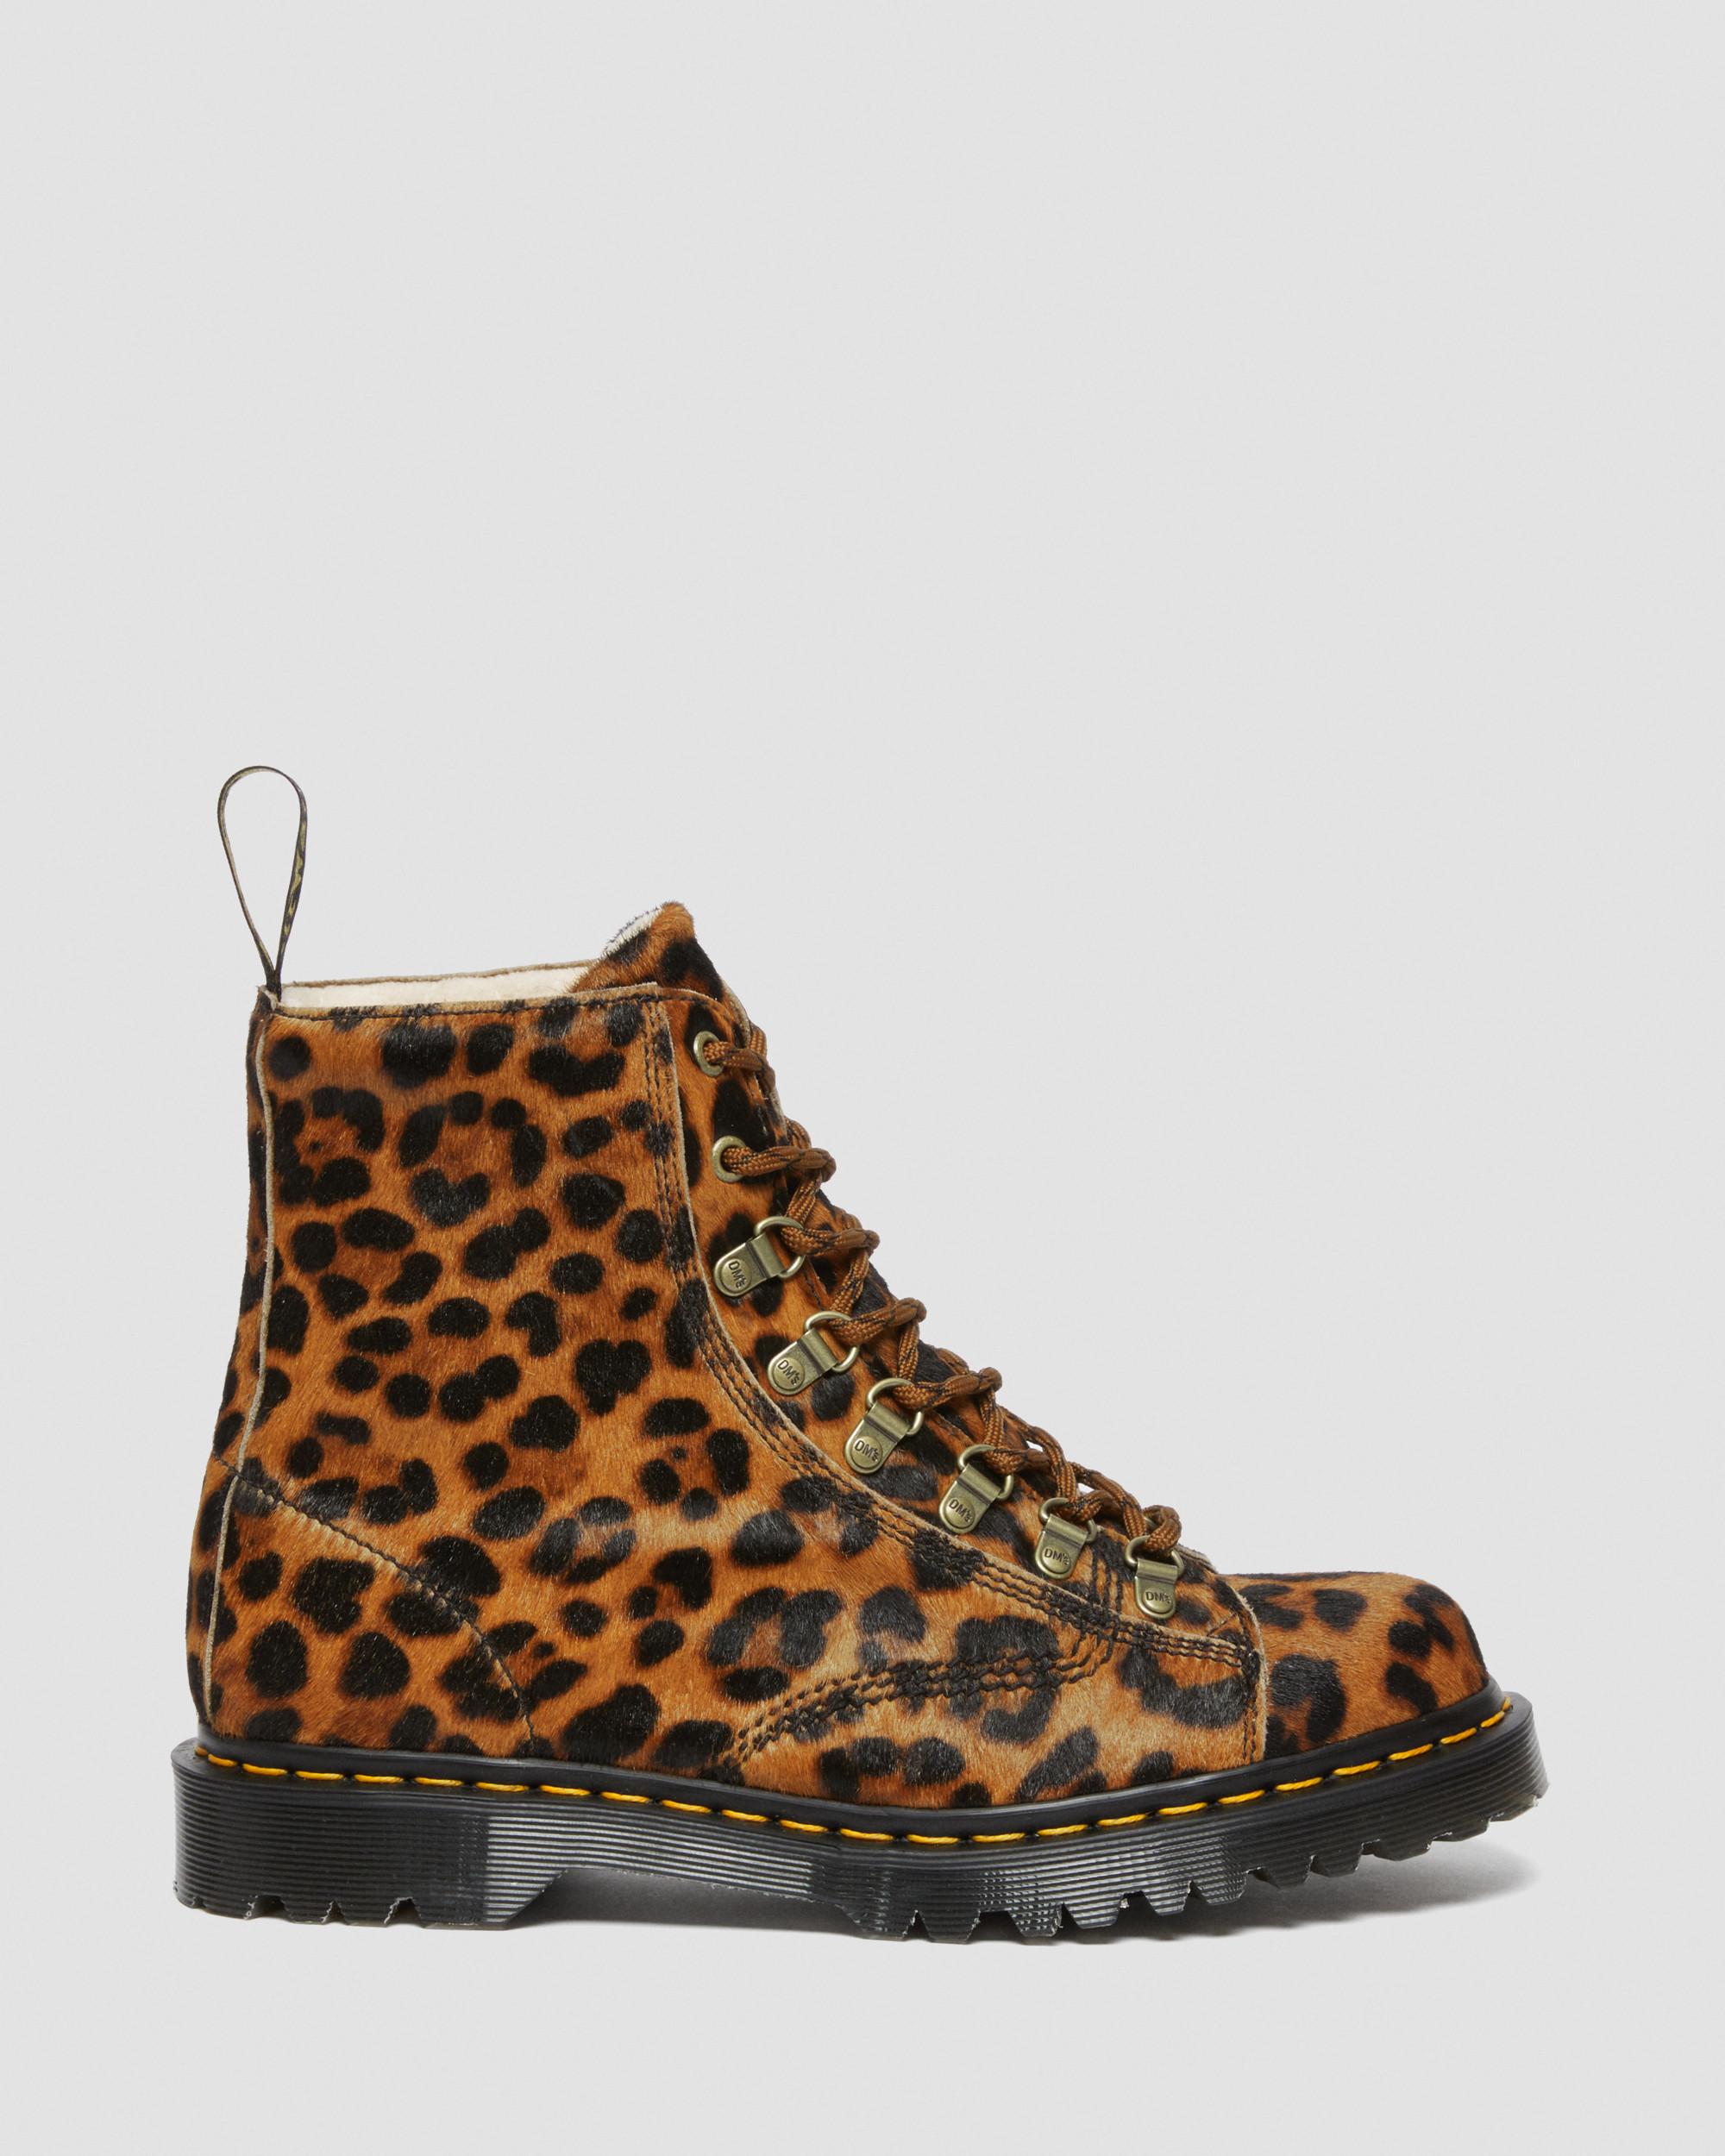 Barton Made in England Leopard Hair On Boots | Dr. Martens